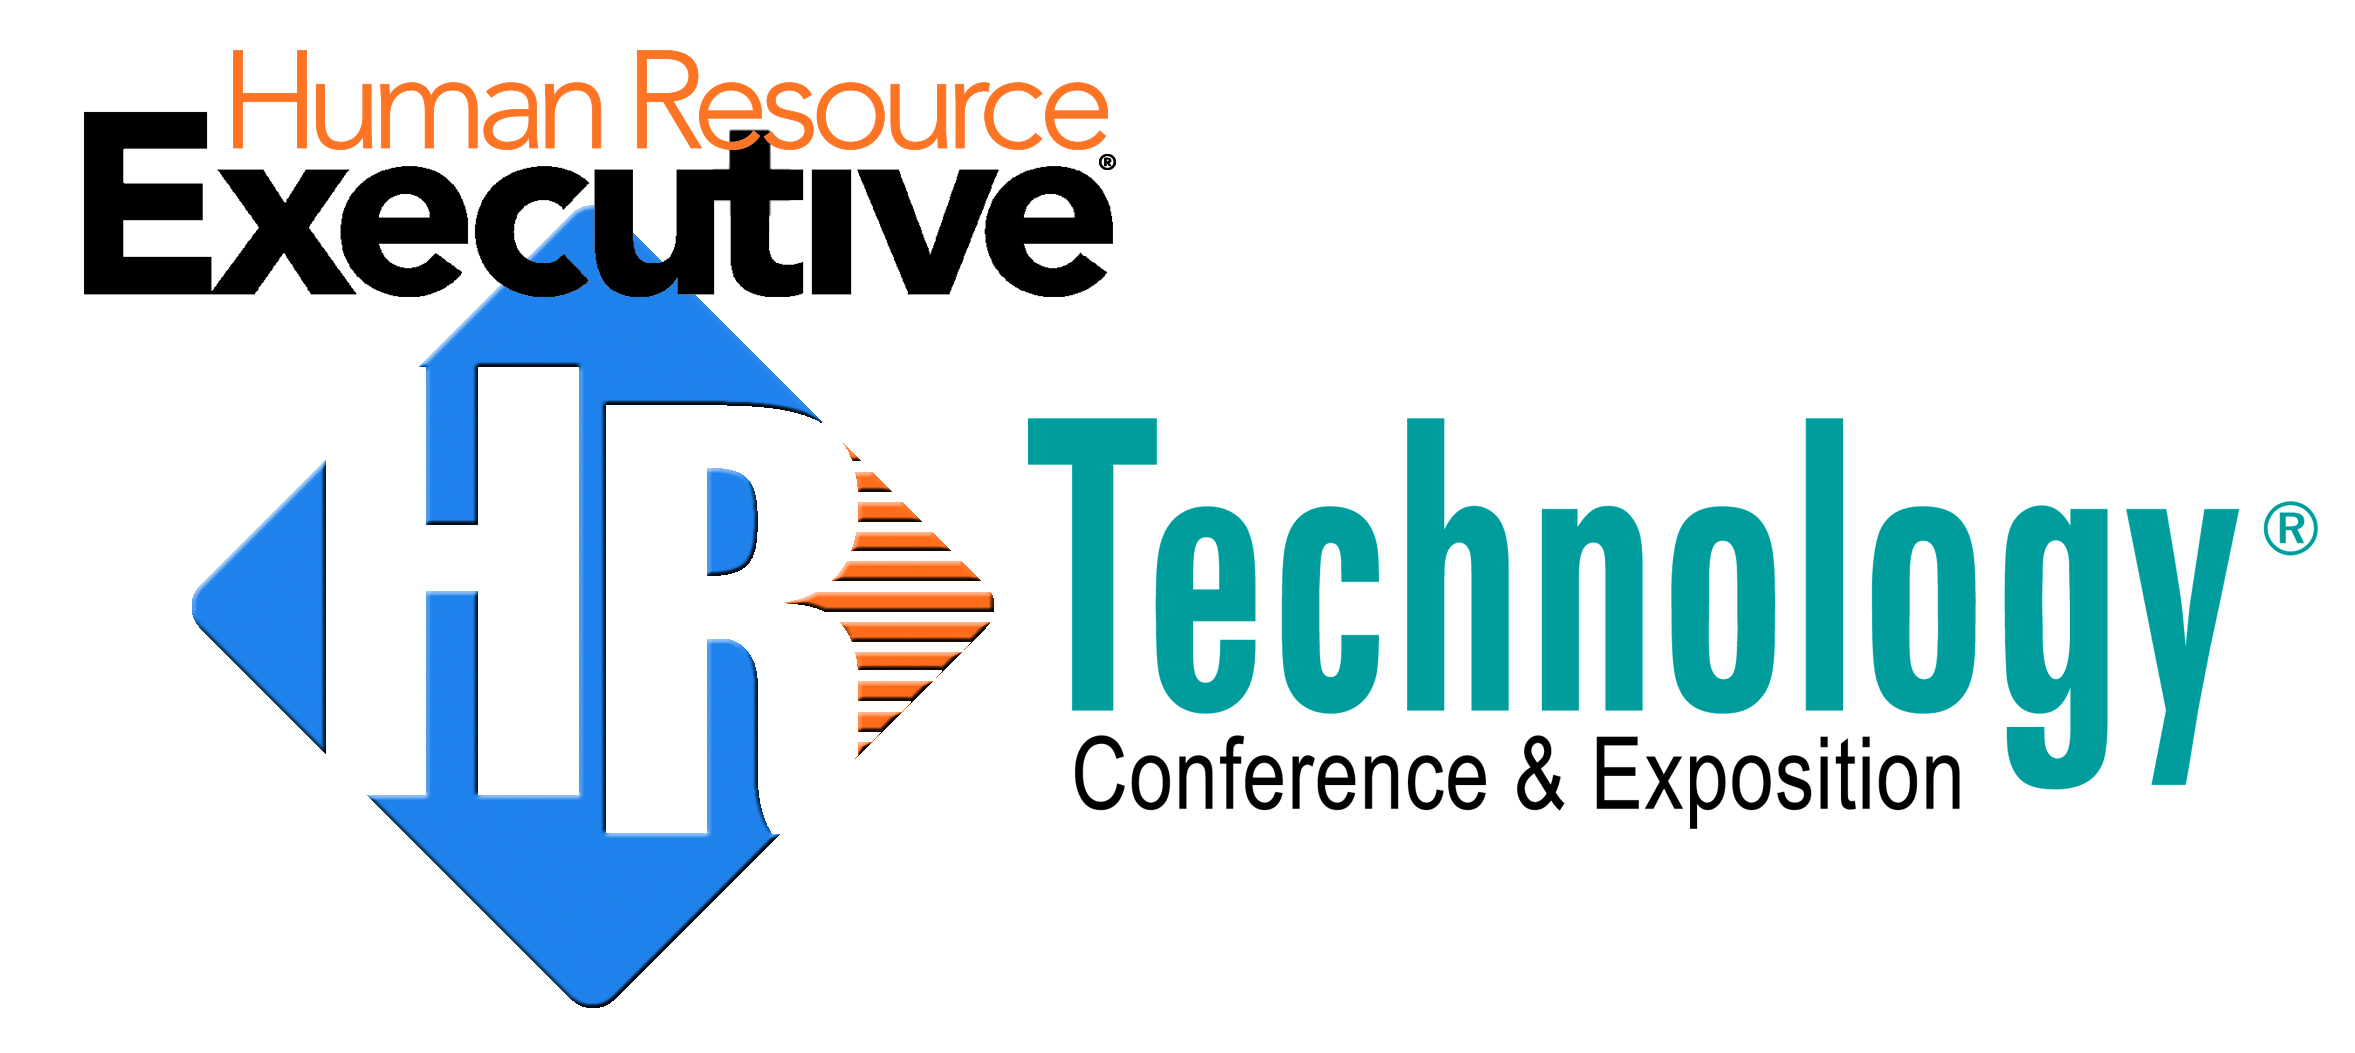 HR Technology Conference & Exposition